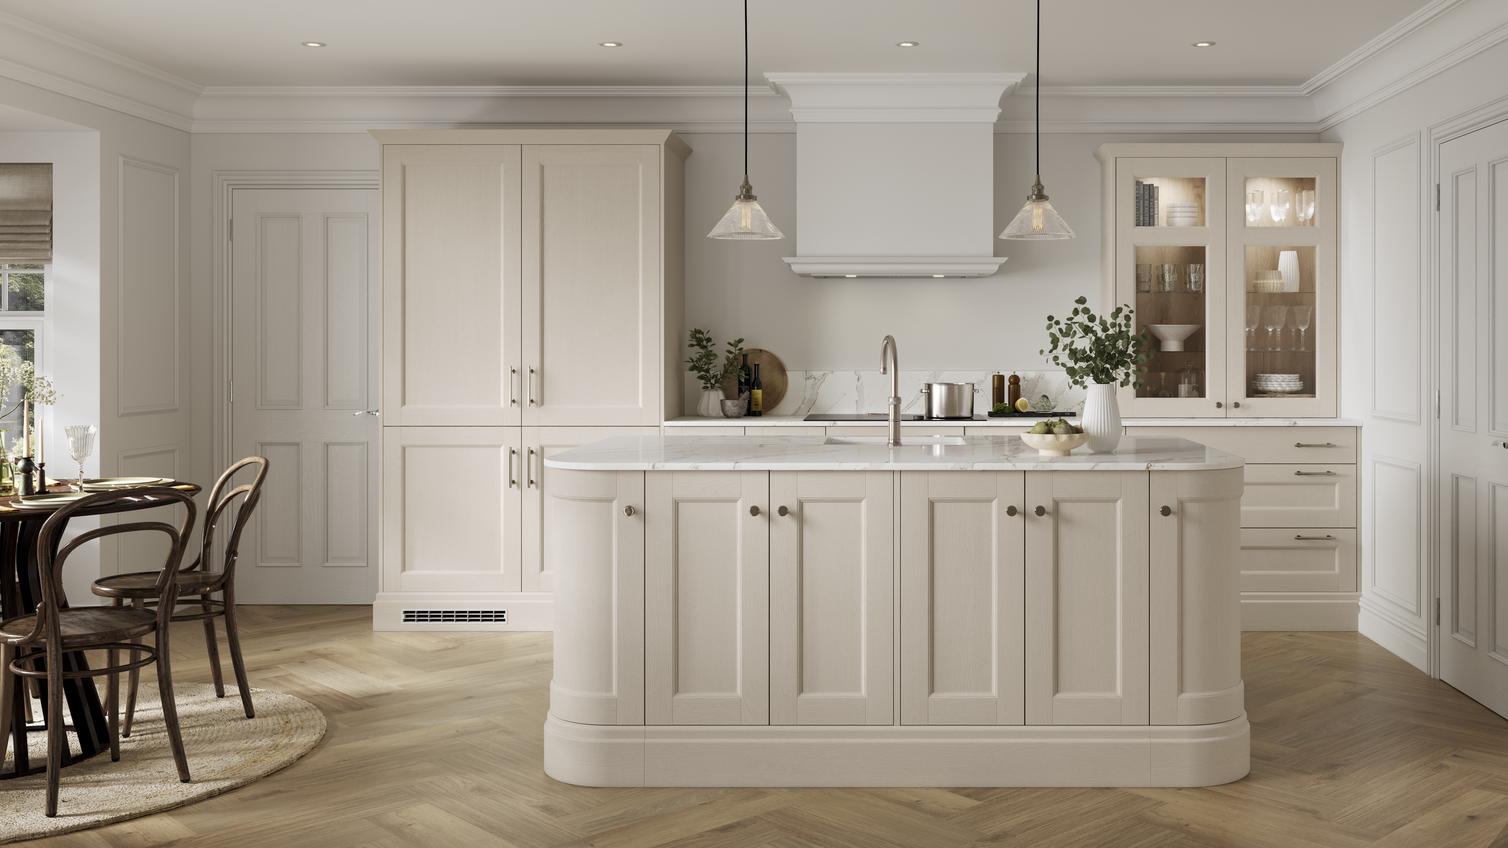 A cream, linen kitchen with shaker cabinets and glass doors. There is an island with curved corners and white worktop.